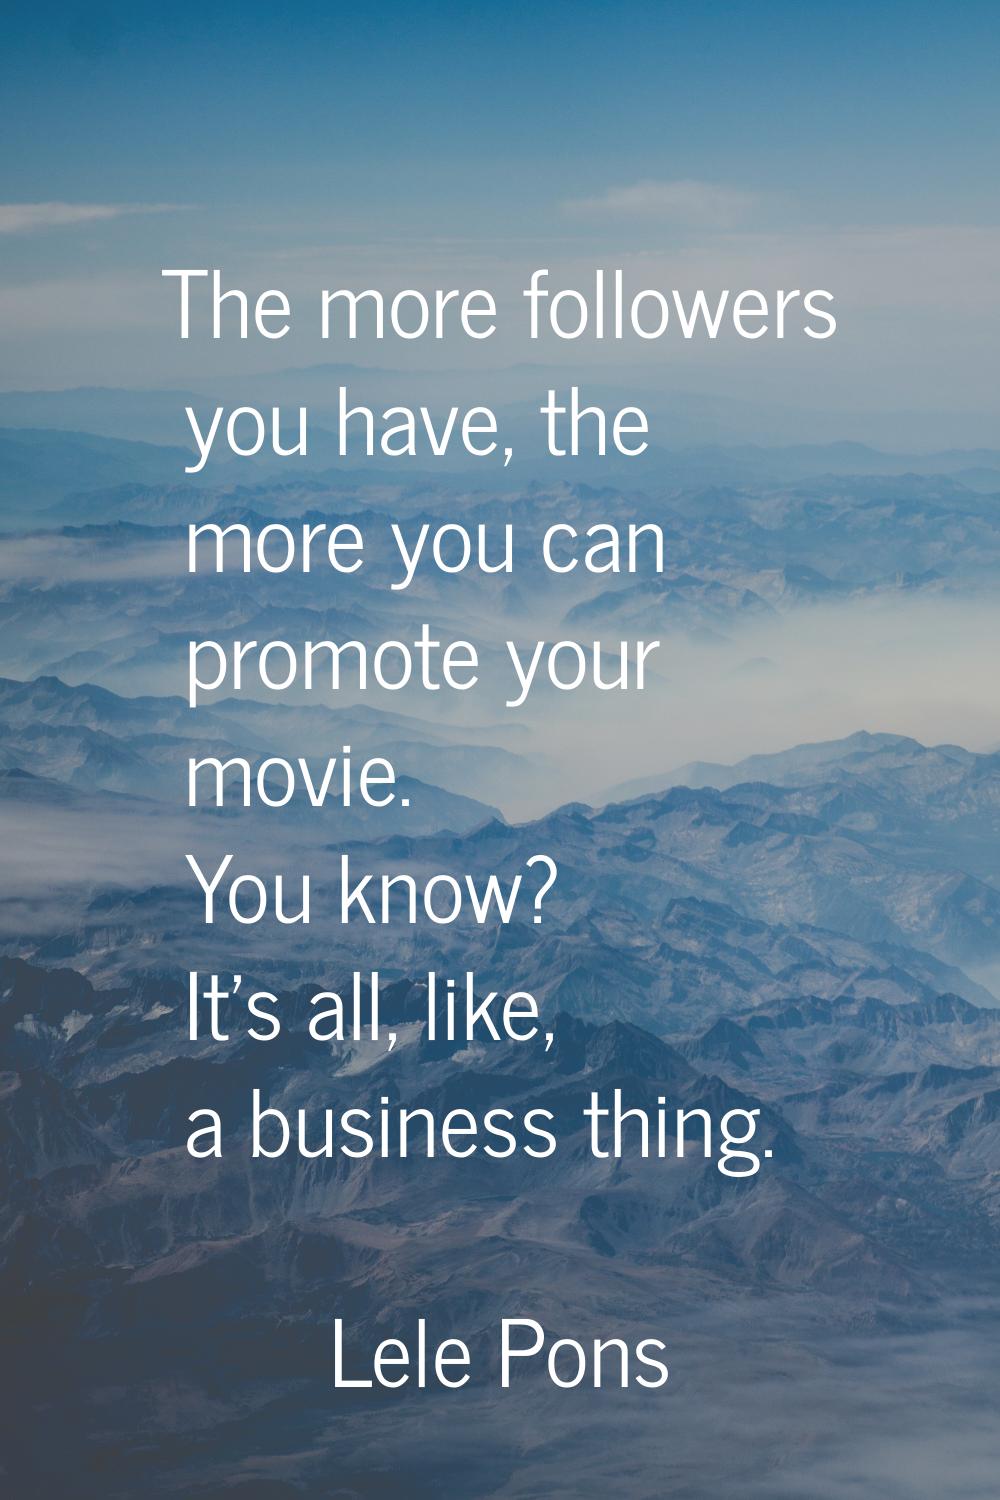 The more followers you have, the more you can promote your movie. You know? It's all, like, a busin